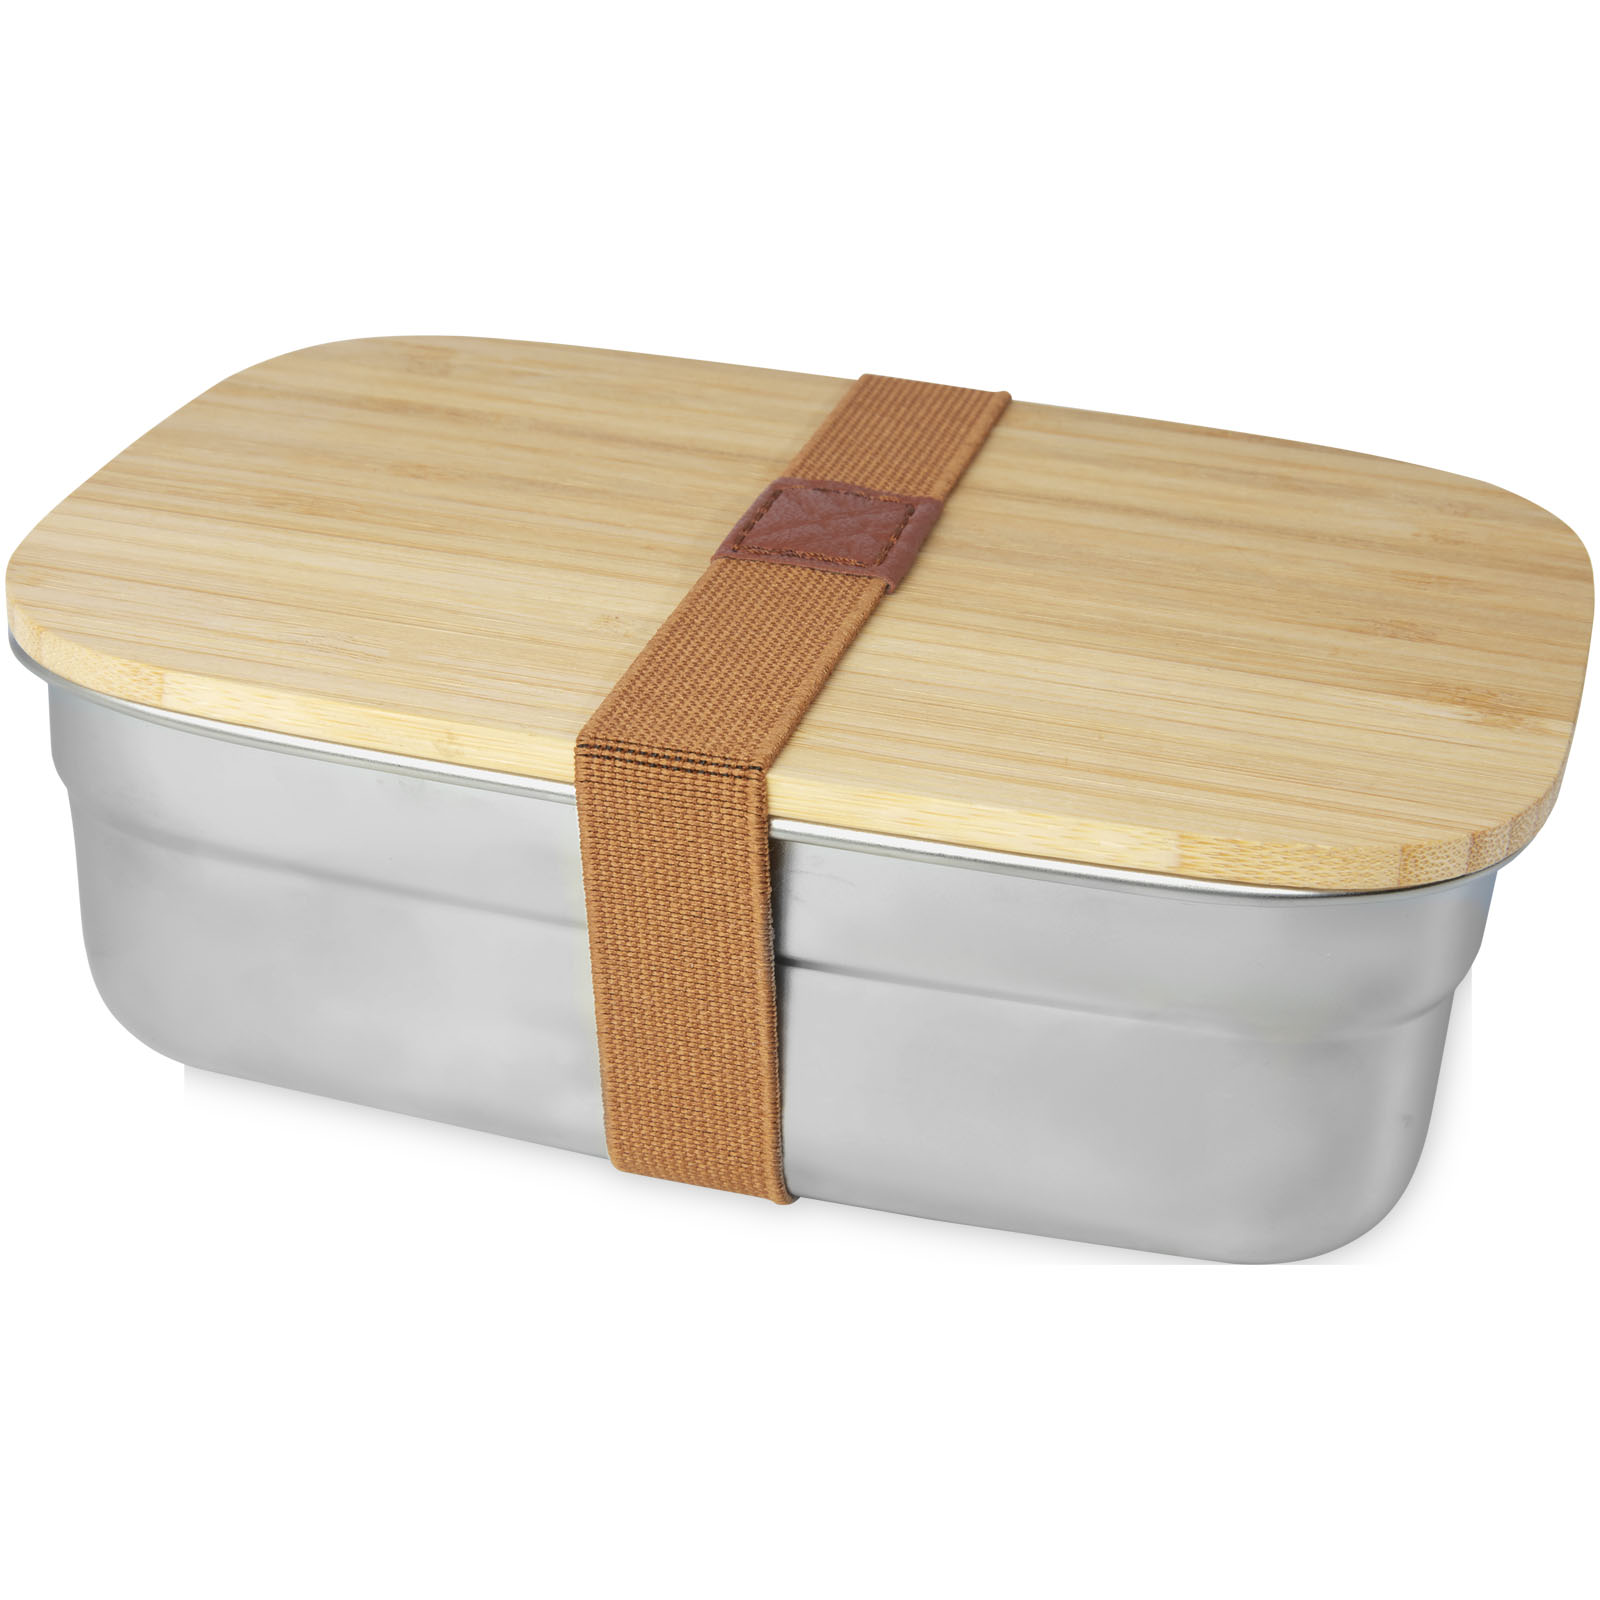 Home & Kitchen - Tite stainless steel lunch box with bamboo lid